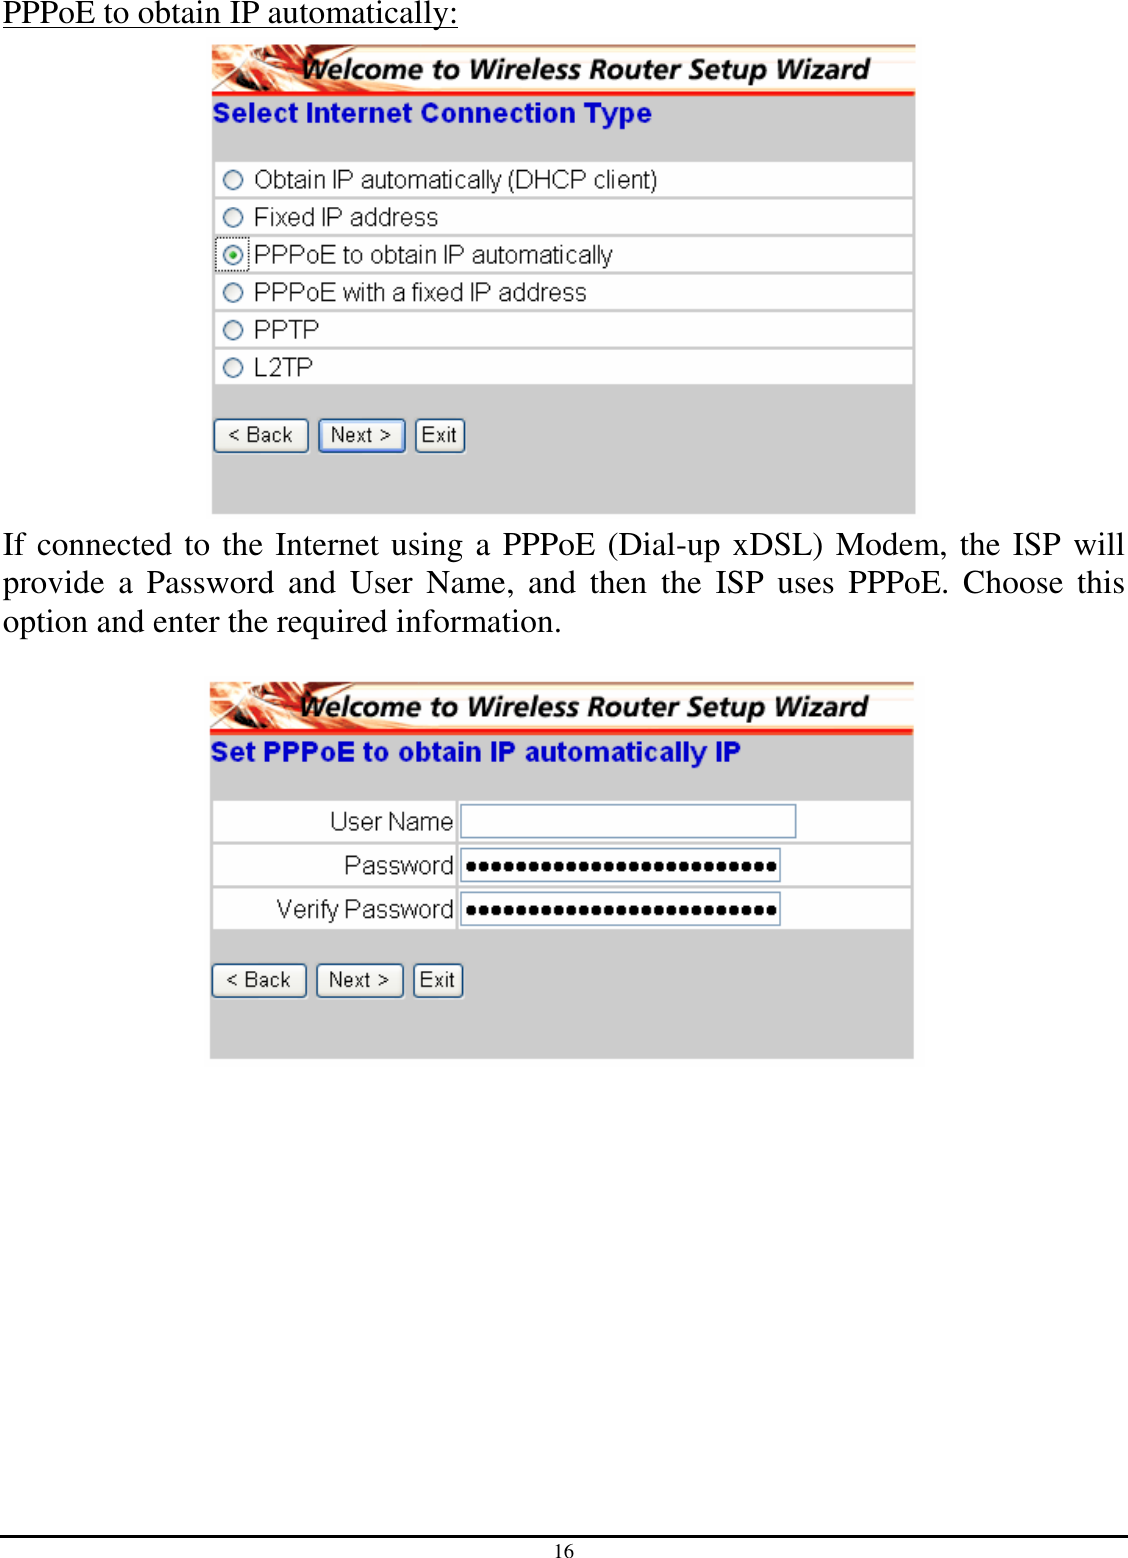 16 PPPoE to obtain IP automatically:  If connected to the Internet using a PPPoE (Dial-up xDSL) Modem, the ISP will provide  a  Password  and  User  Name,  and  then  the  ISP  uses  PPPoE.  Choose  this option and enter the required information.   